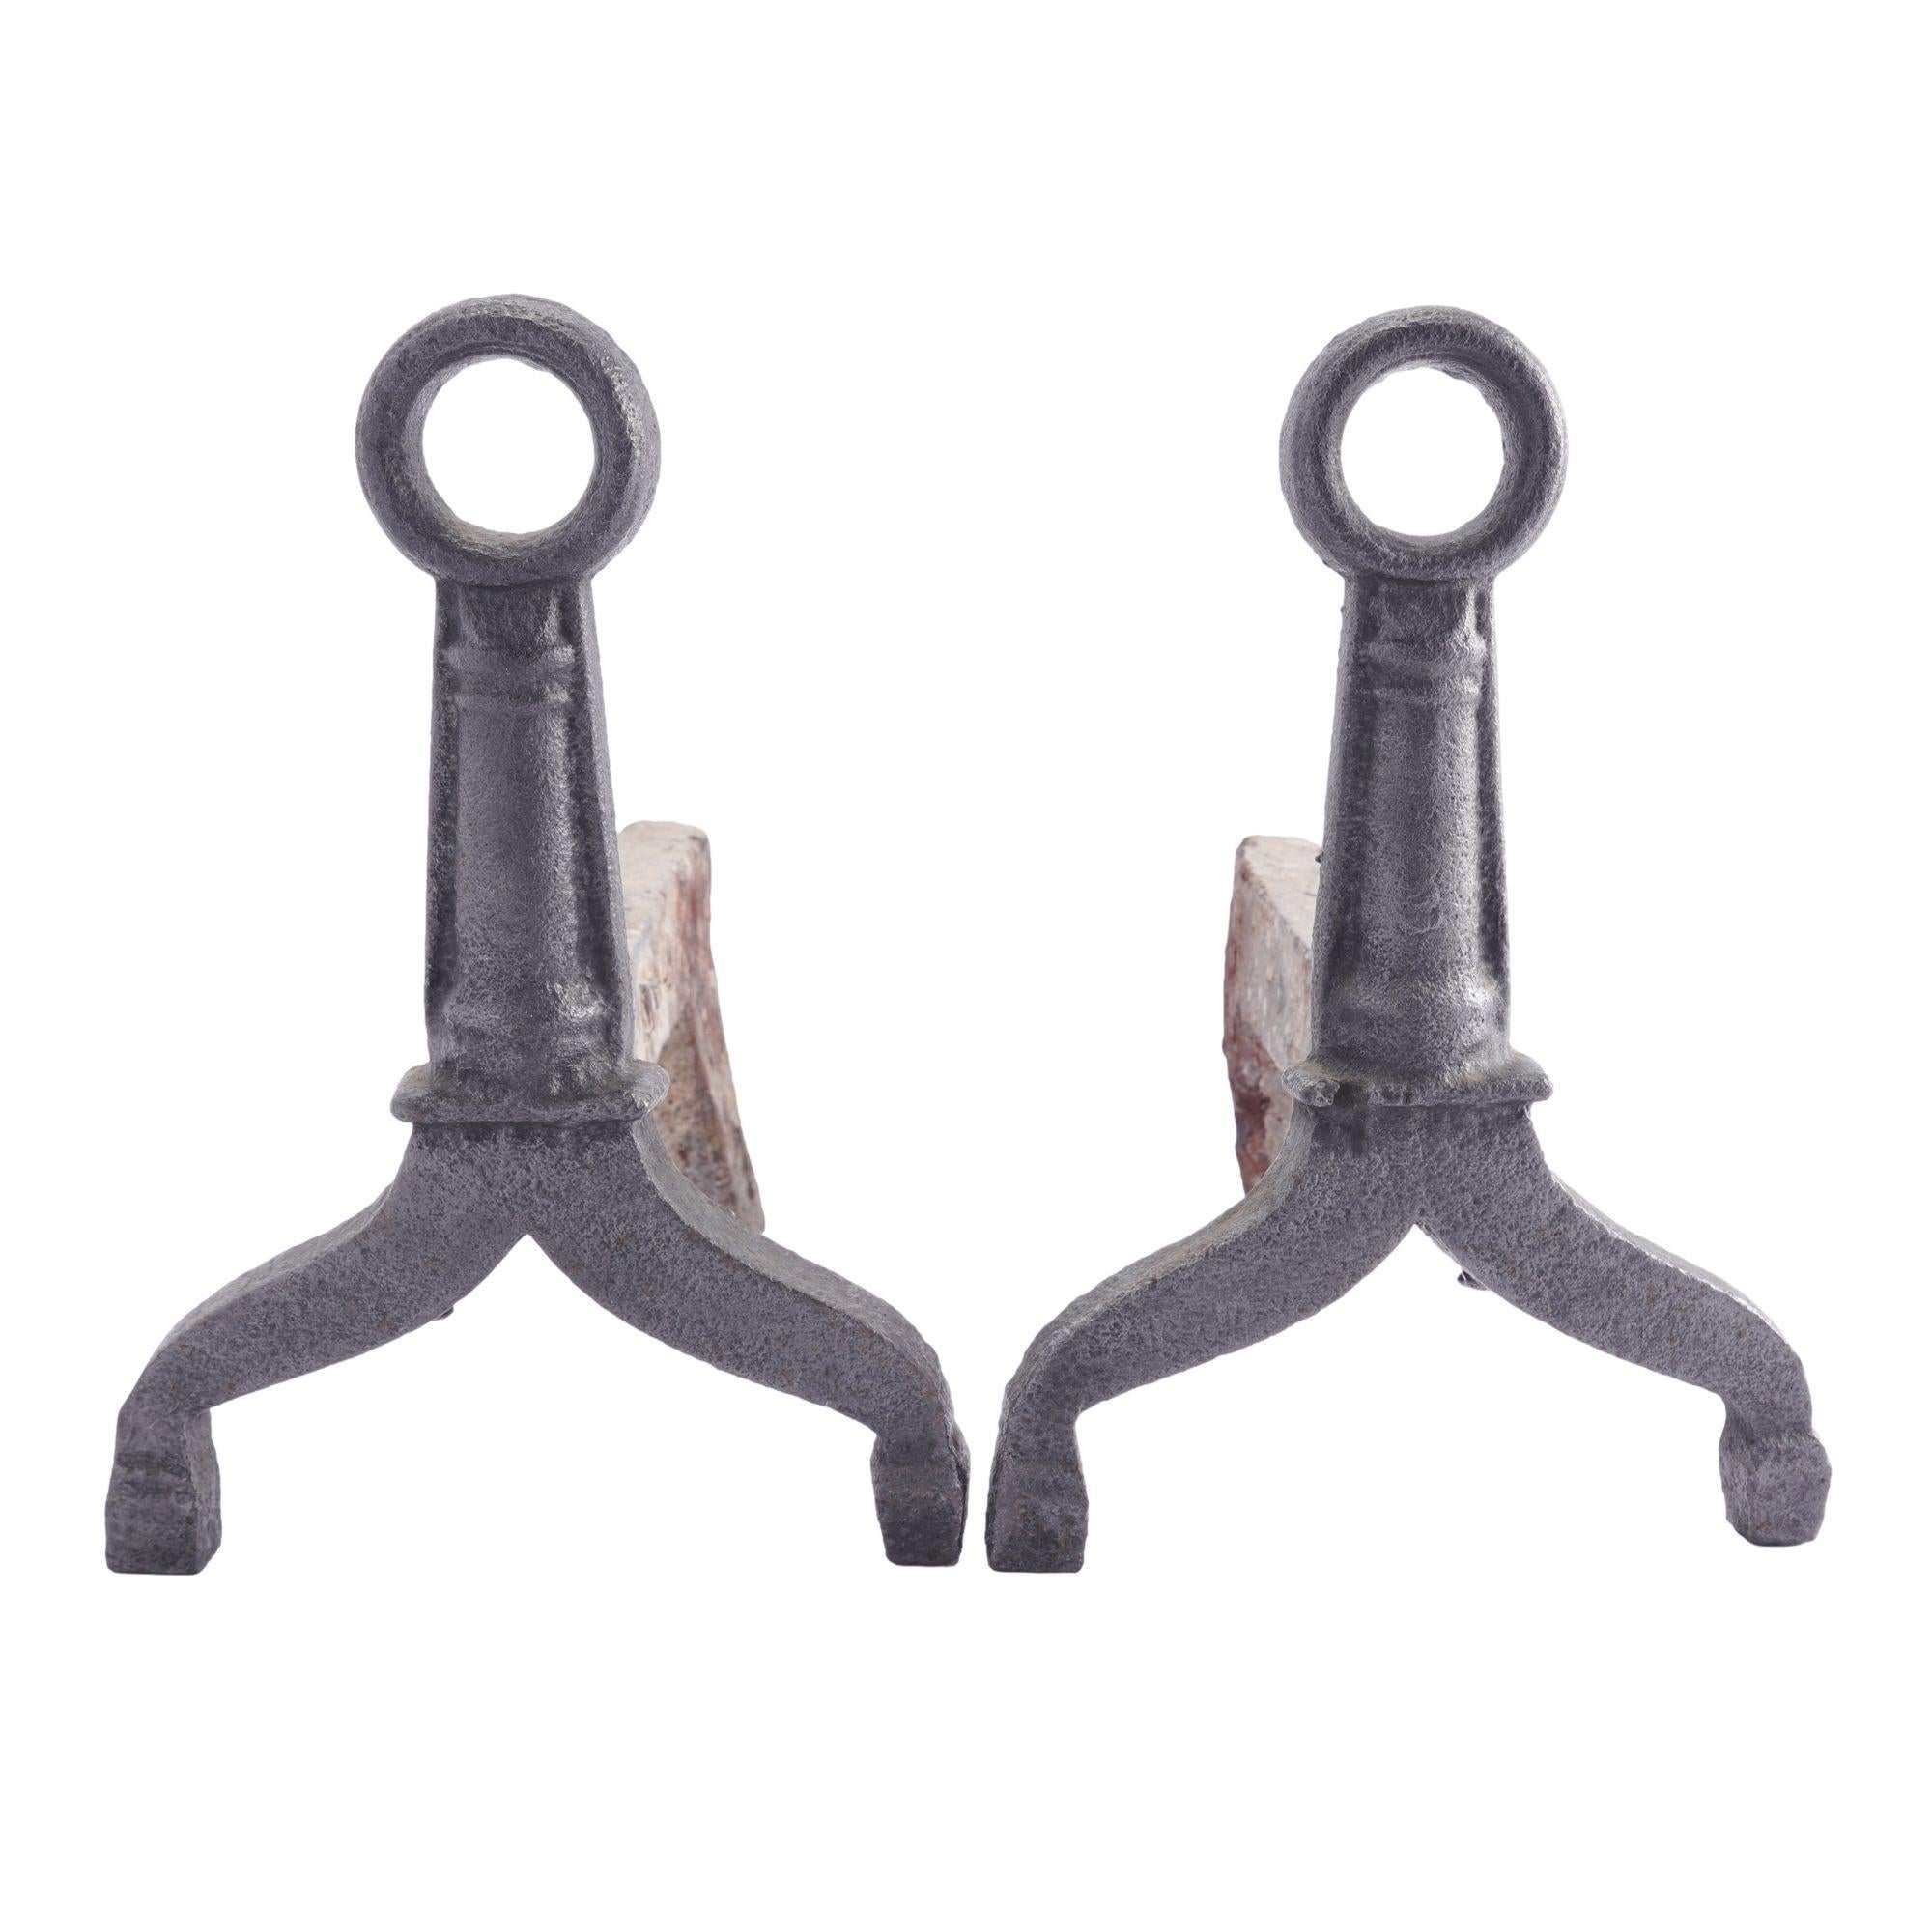 Puddle cast iron andirons with ring form finials.
American, Massachusetts, circa 1820.